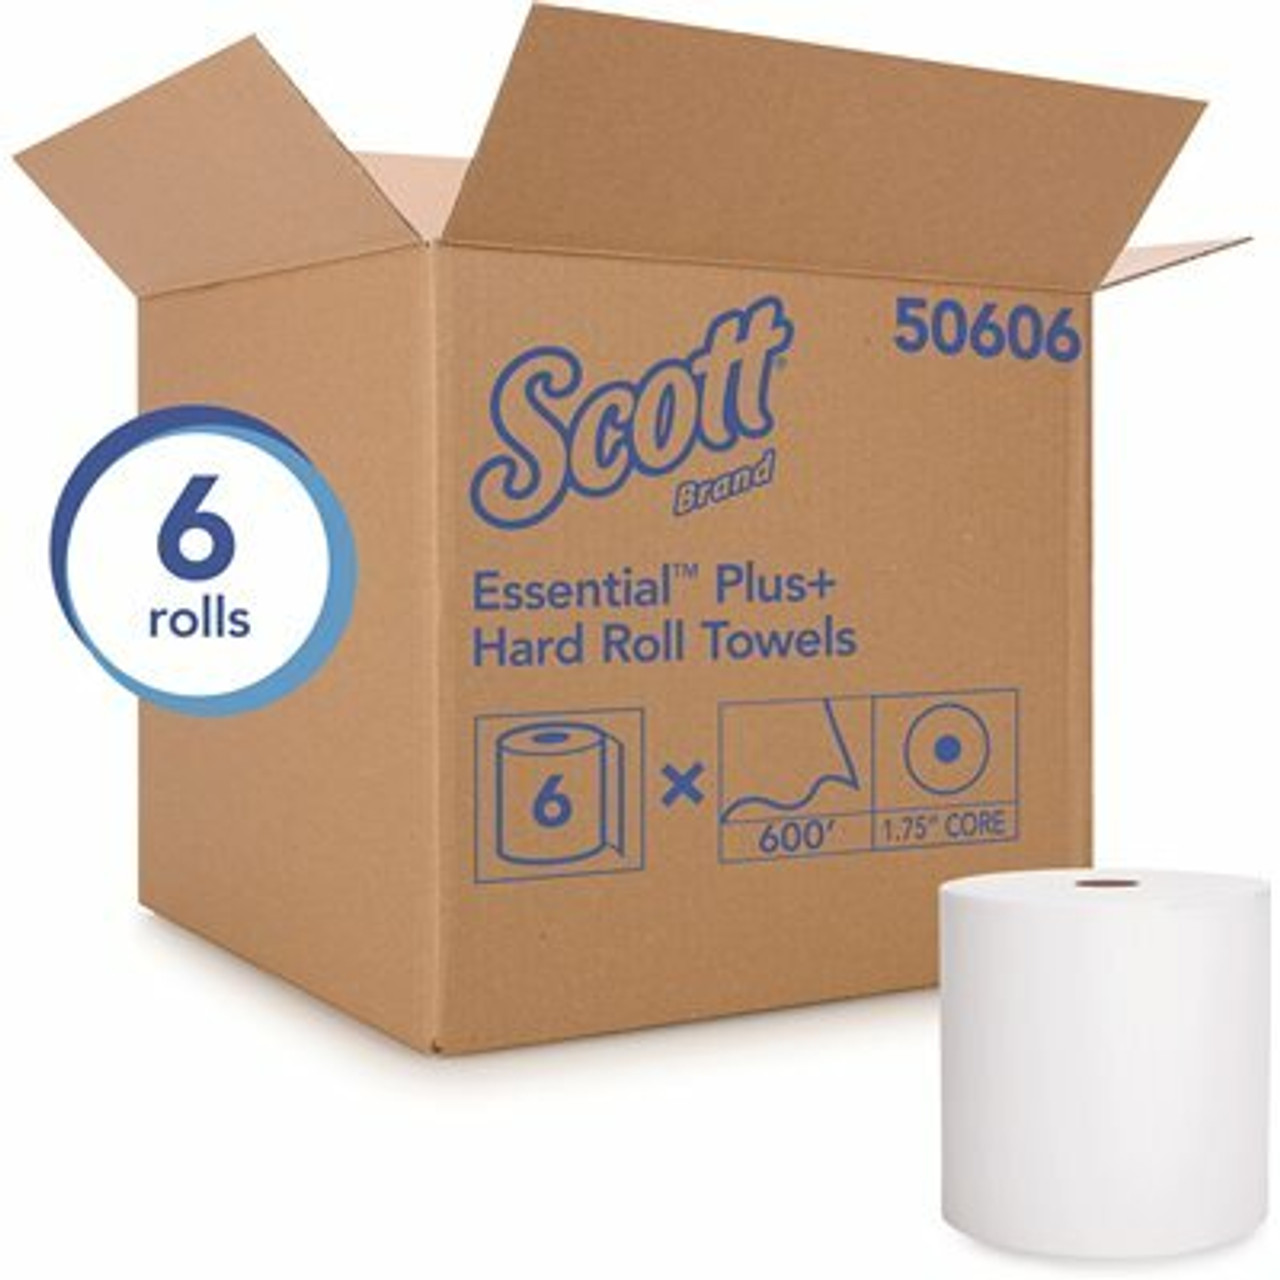 Scott Essential 3,600 Ft. Plus Hard Roll Paper Towels With Premium Absorbency Pockets In White (6-Rolls/Case)